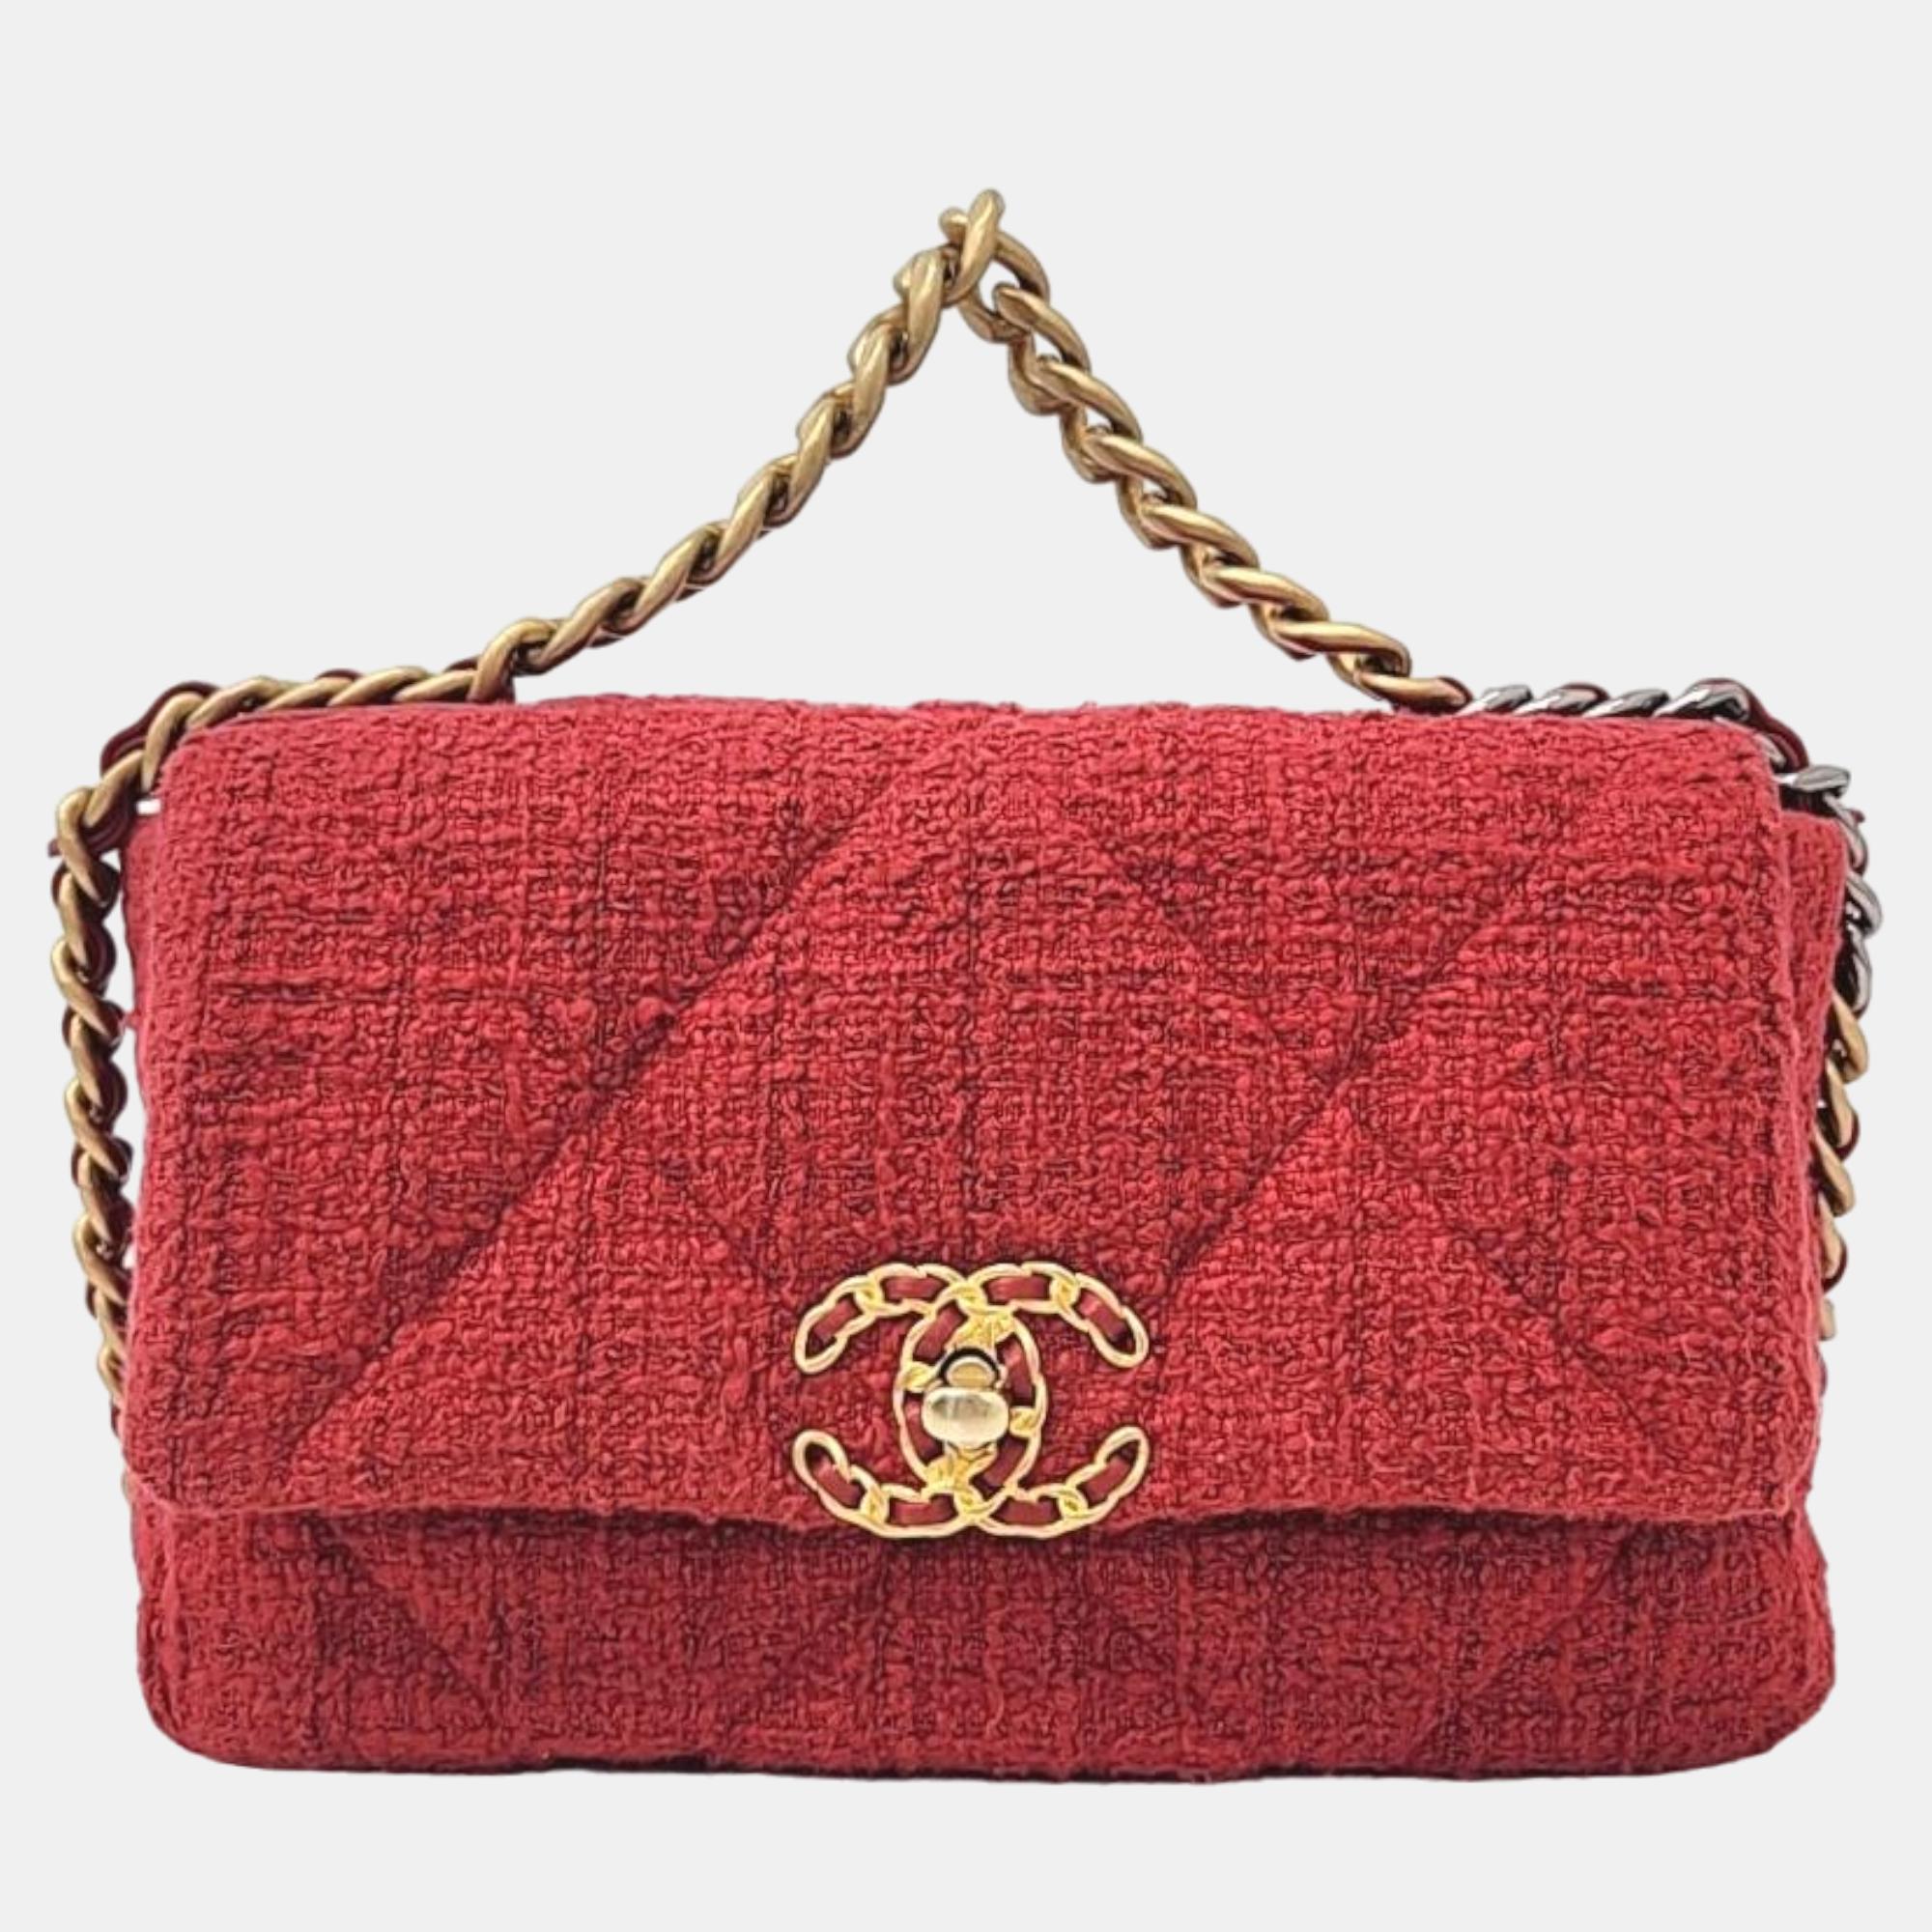 Chanel red tweed small flap bag